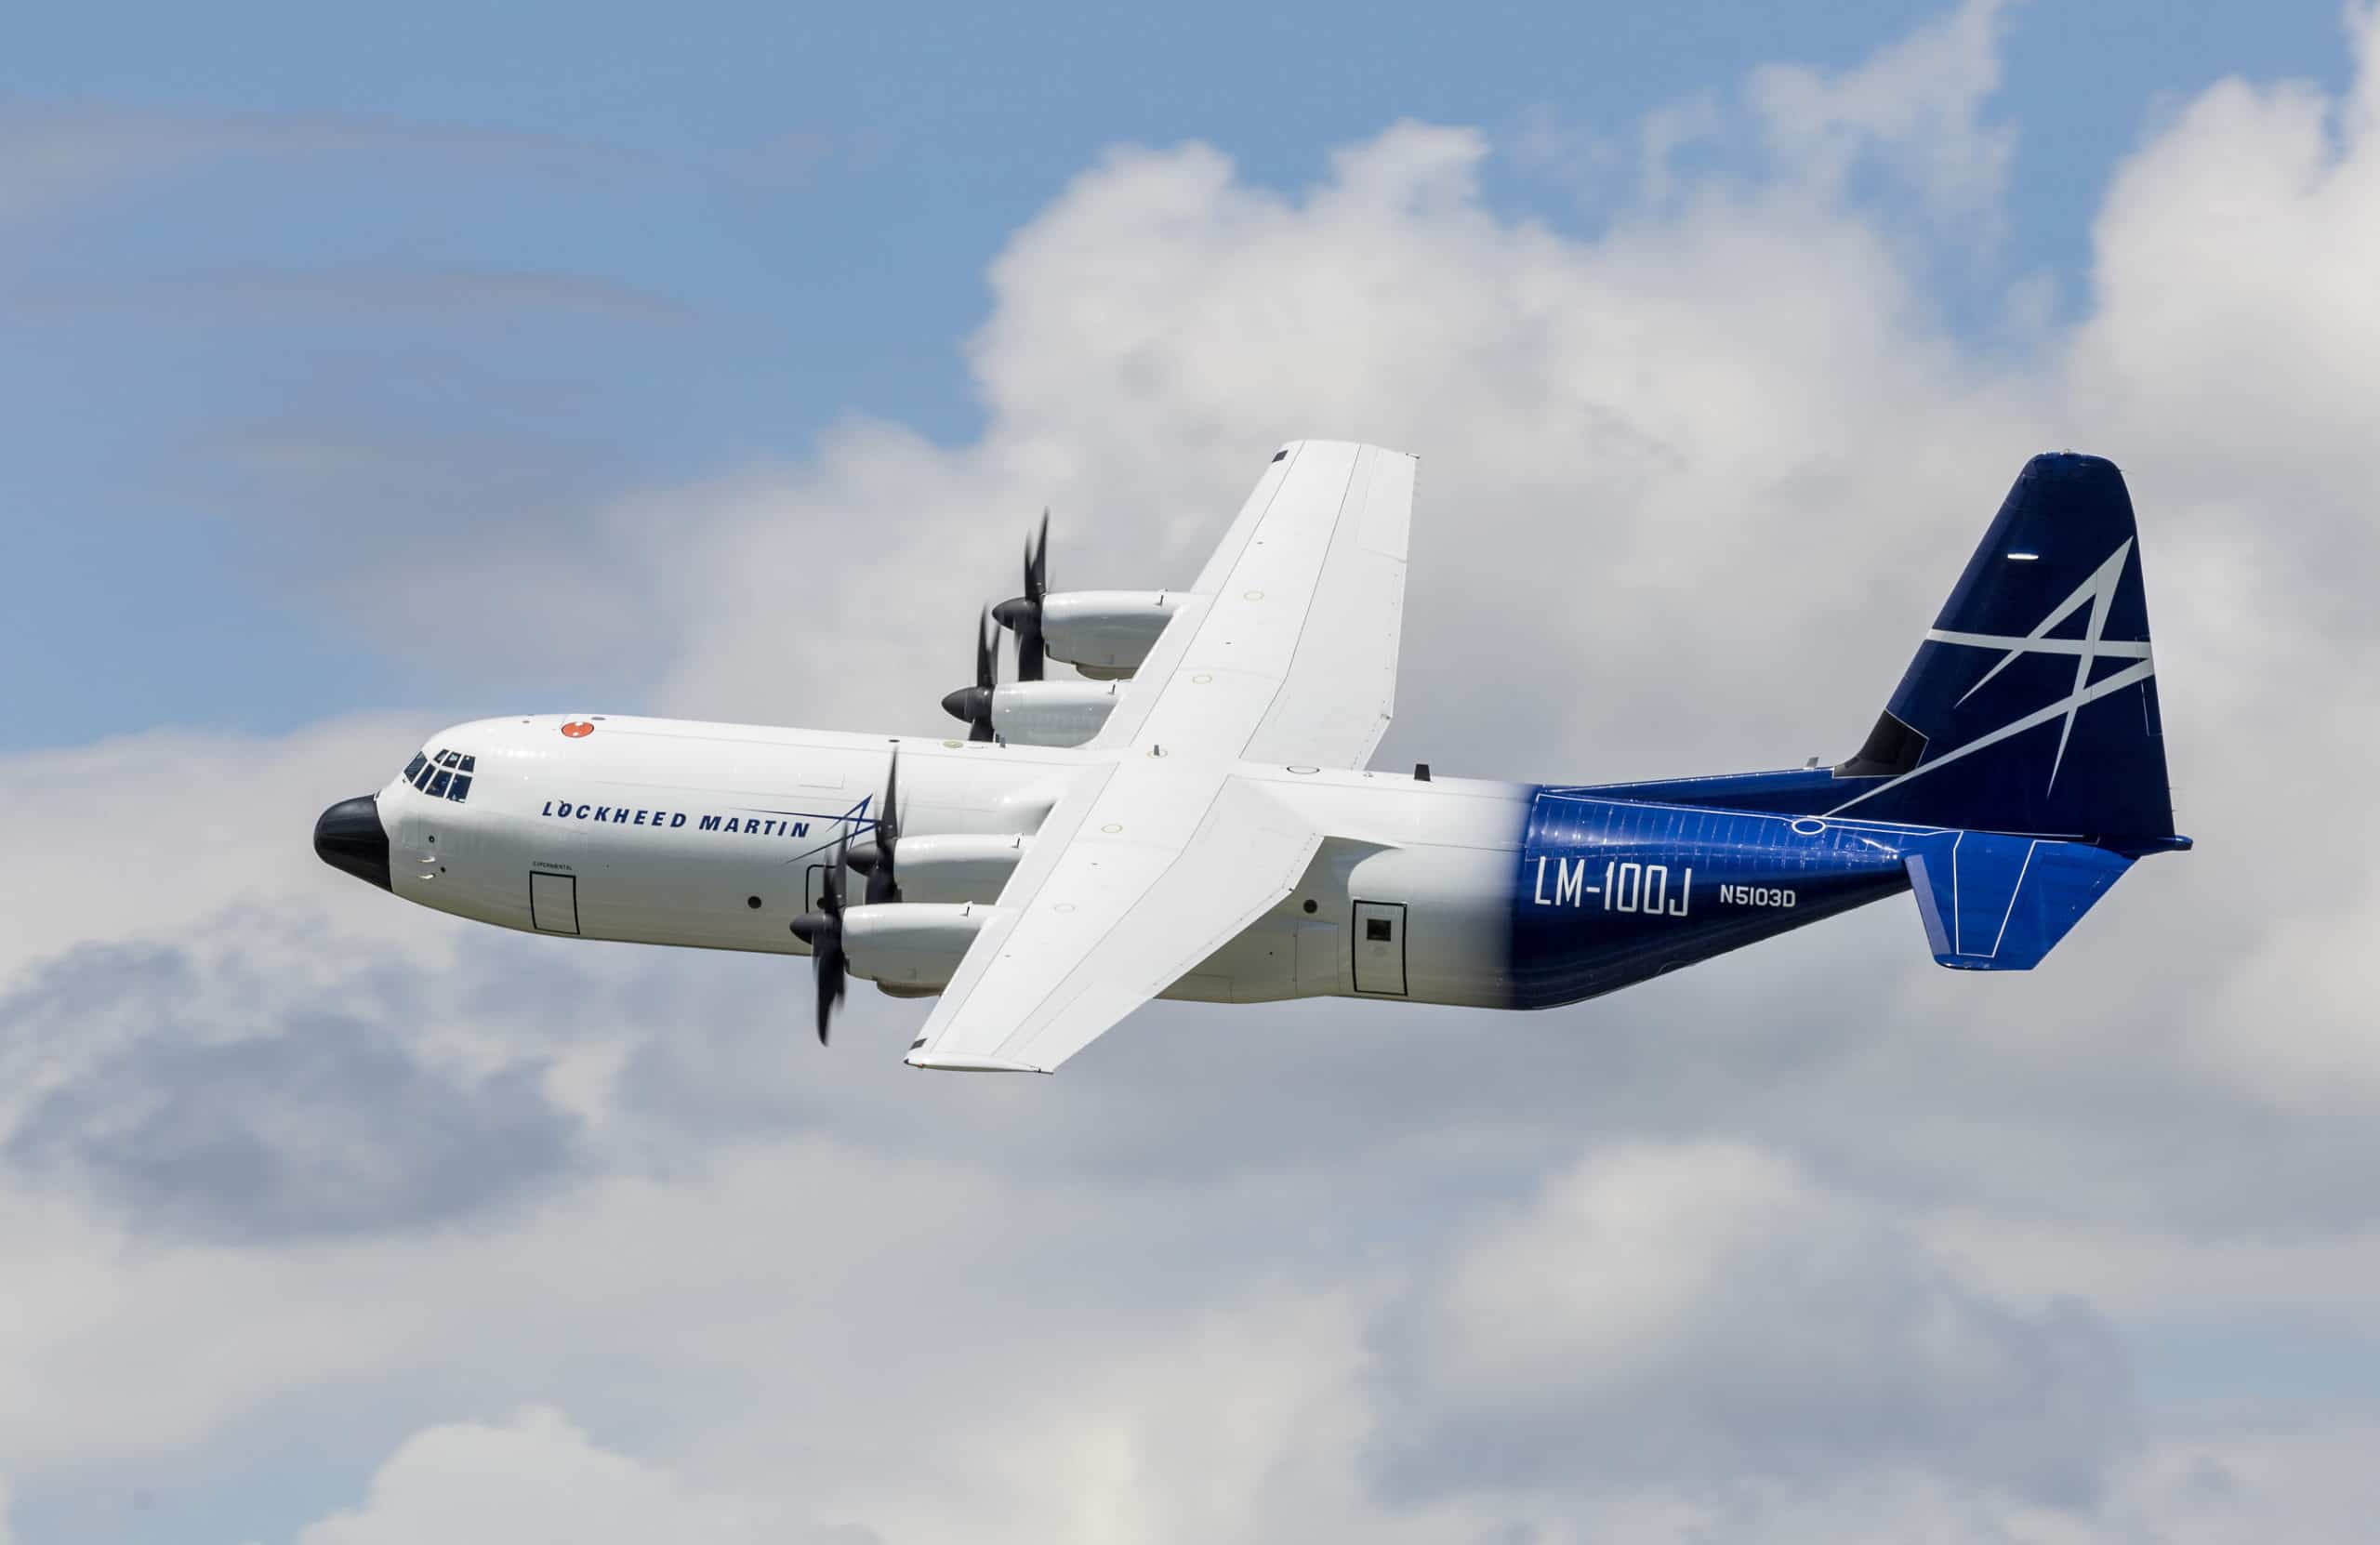 Lockheed Martin's LM-100J commercial freighter received its type design update certification from the Federal Aviation Administration, which allows it to operate from any commercial airfield in the world.